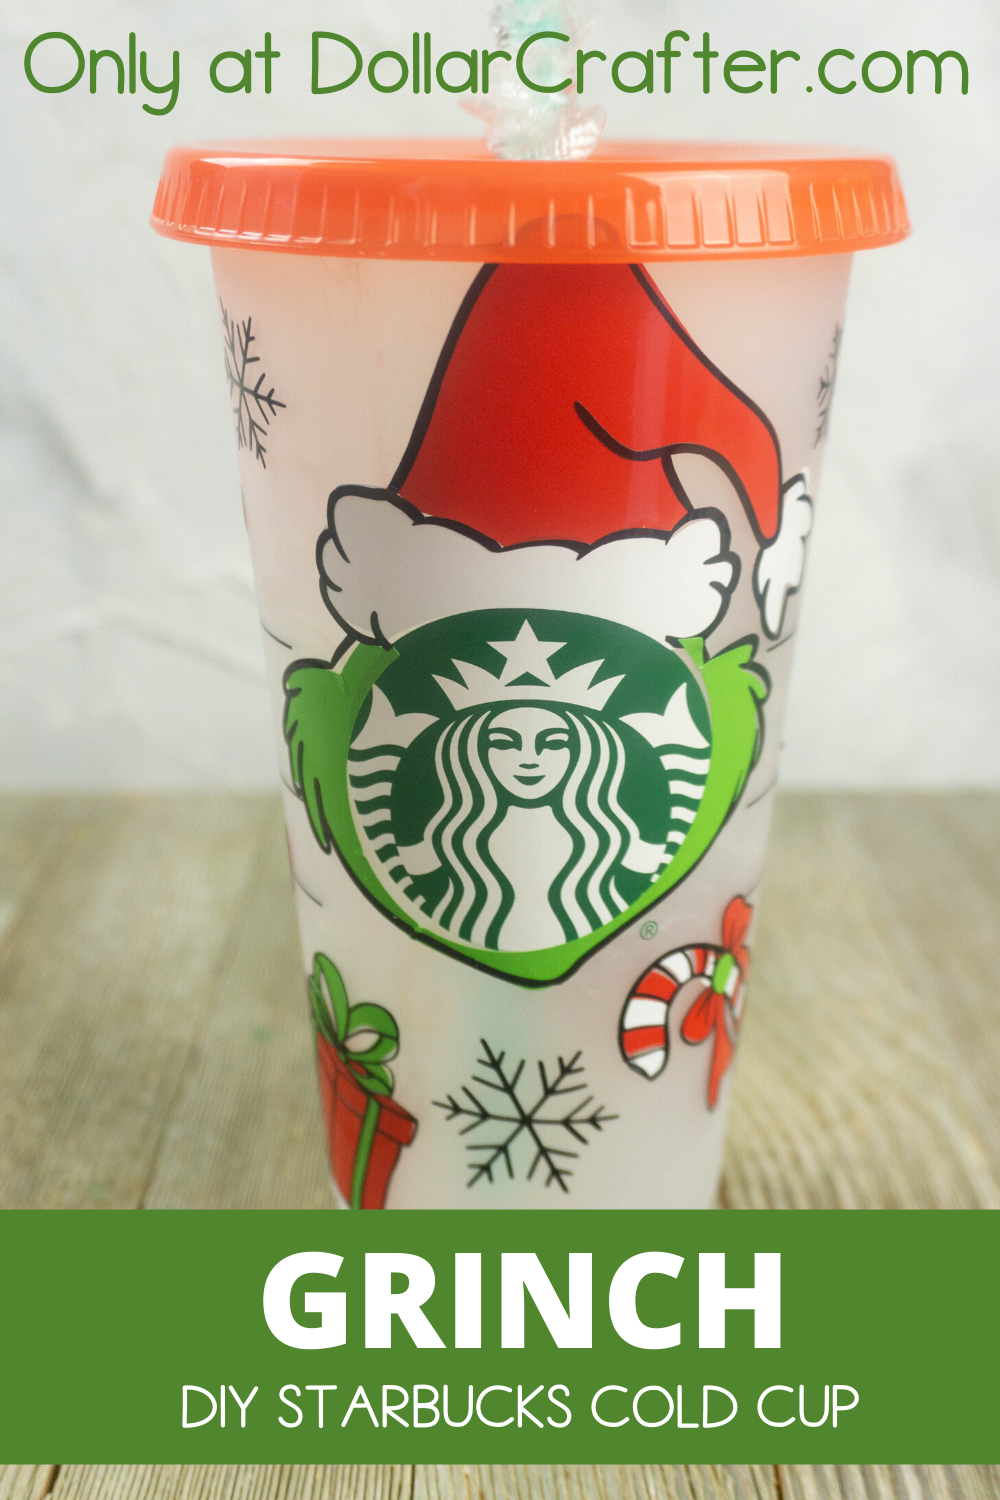 https://dollarcrafter.com/wp-content/uploads/2021/11/grinch-starbucks-cup.png